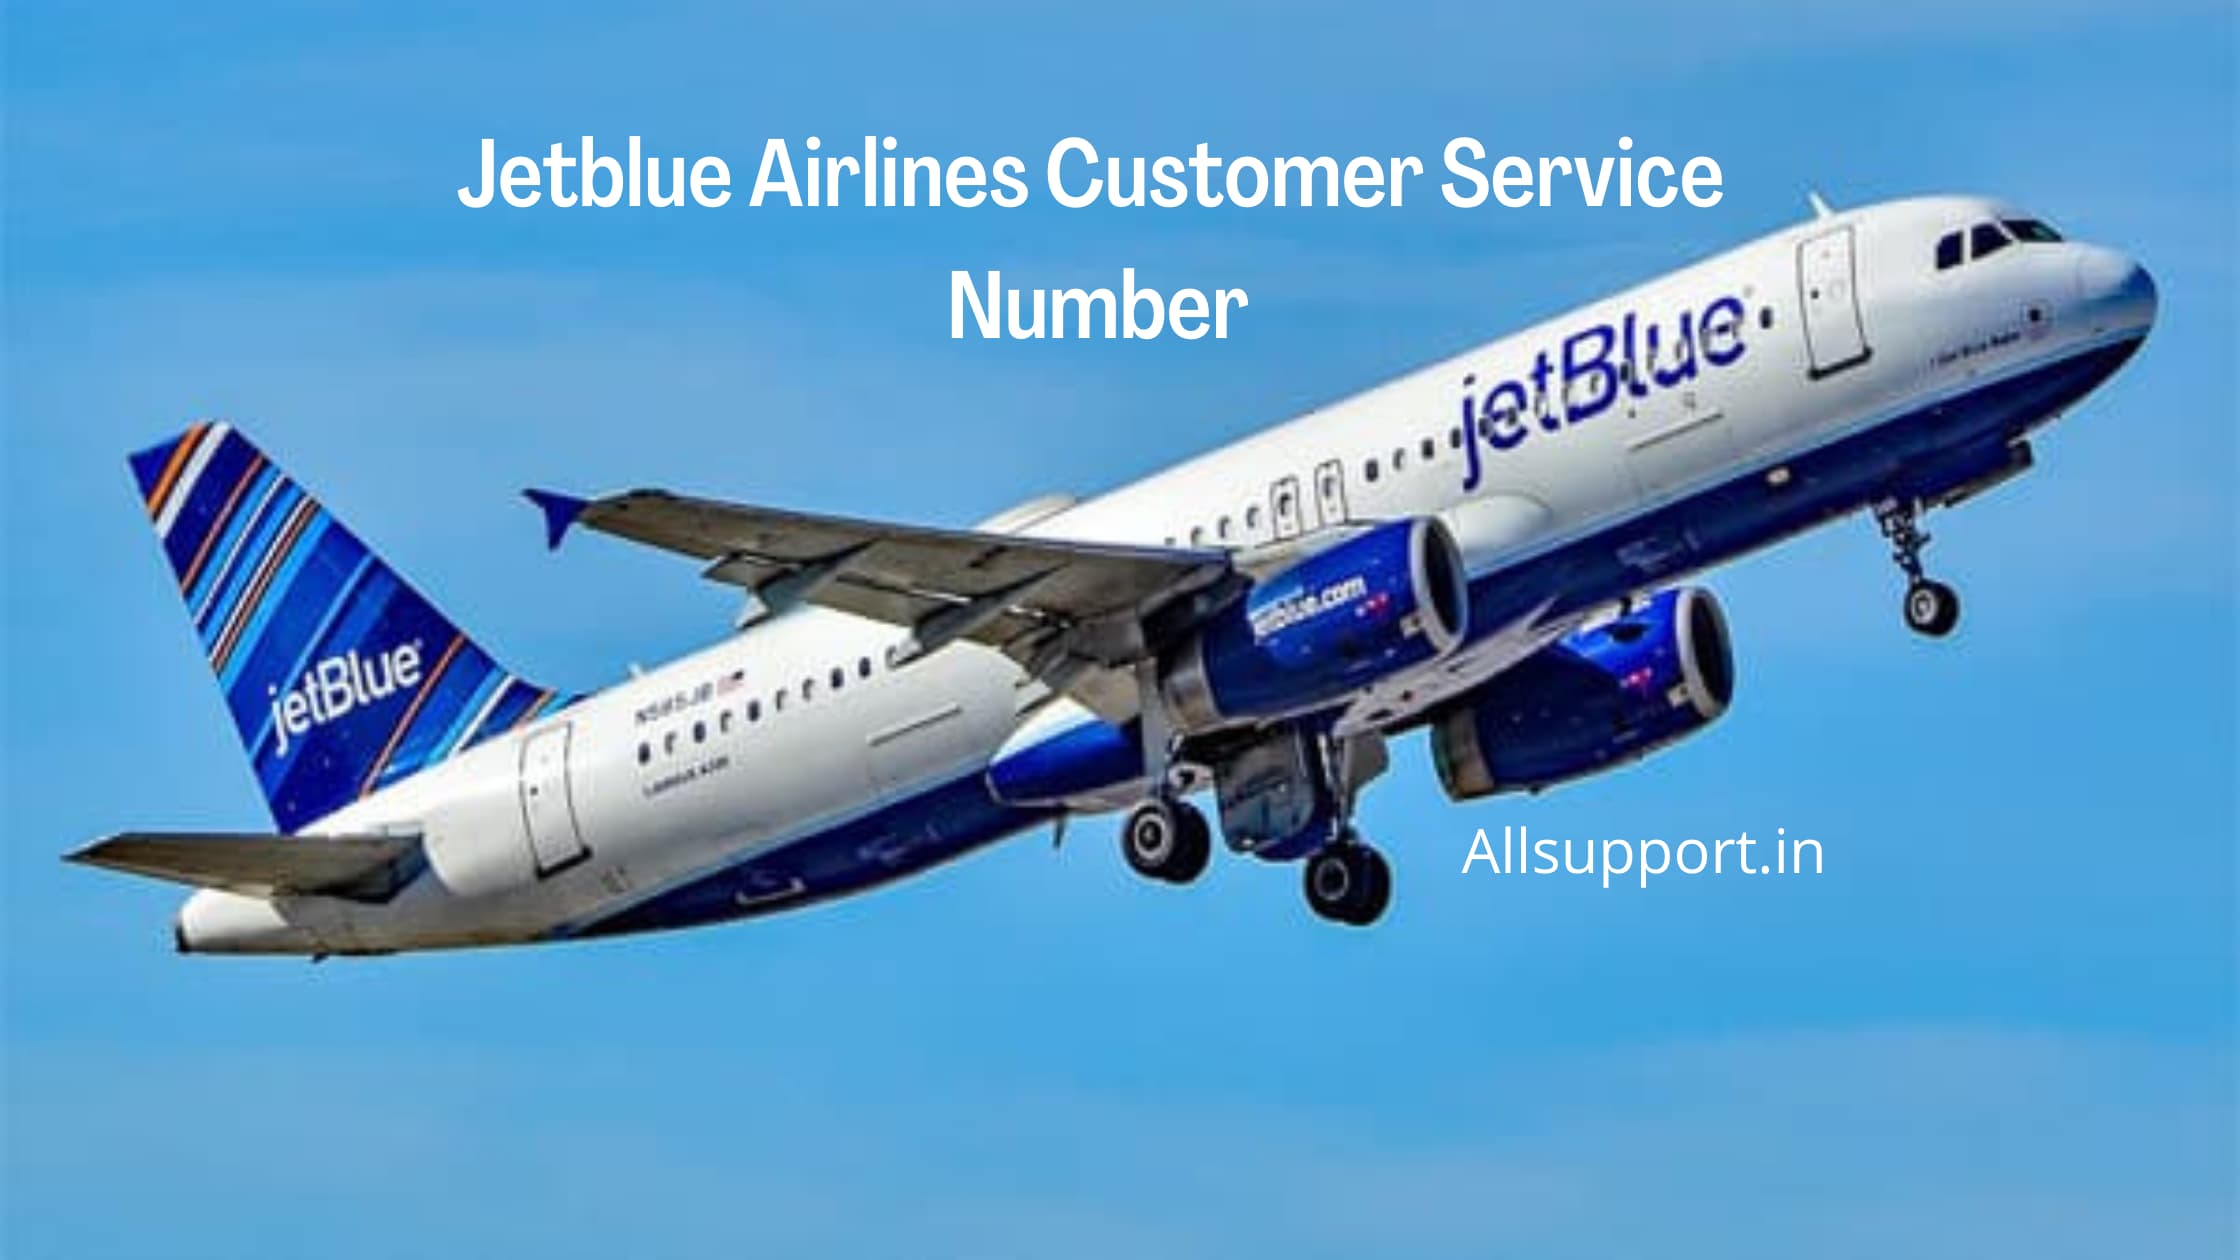 Jetblue Airlines Customer Service Number (2)